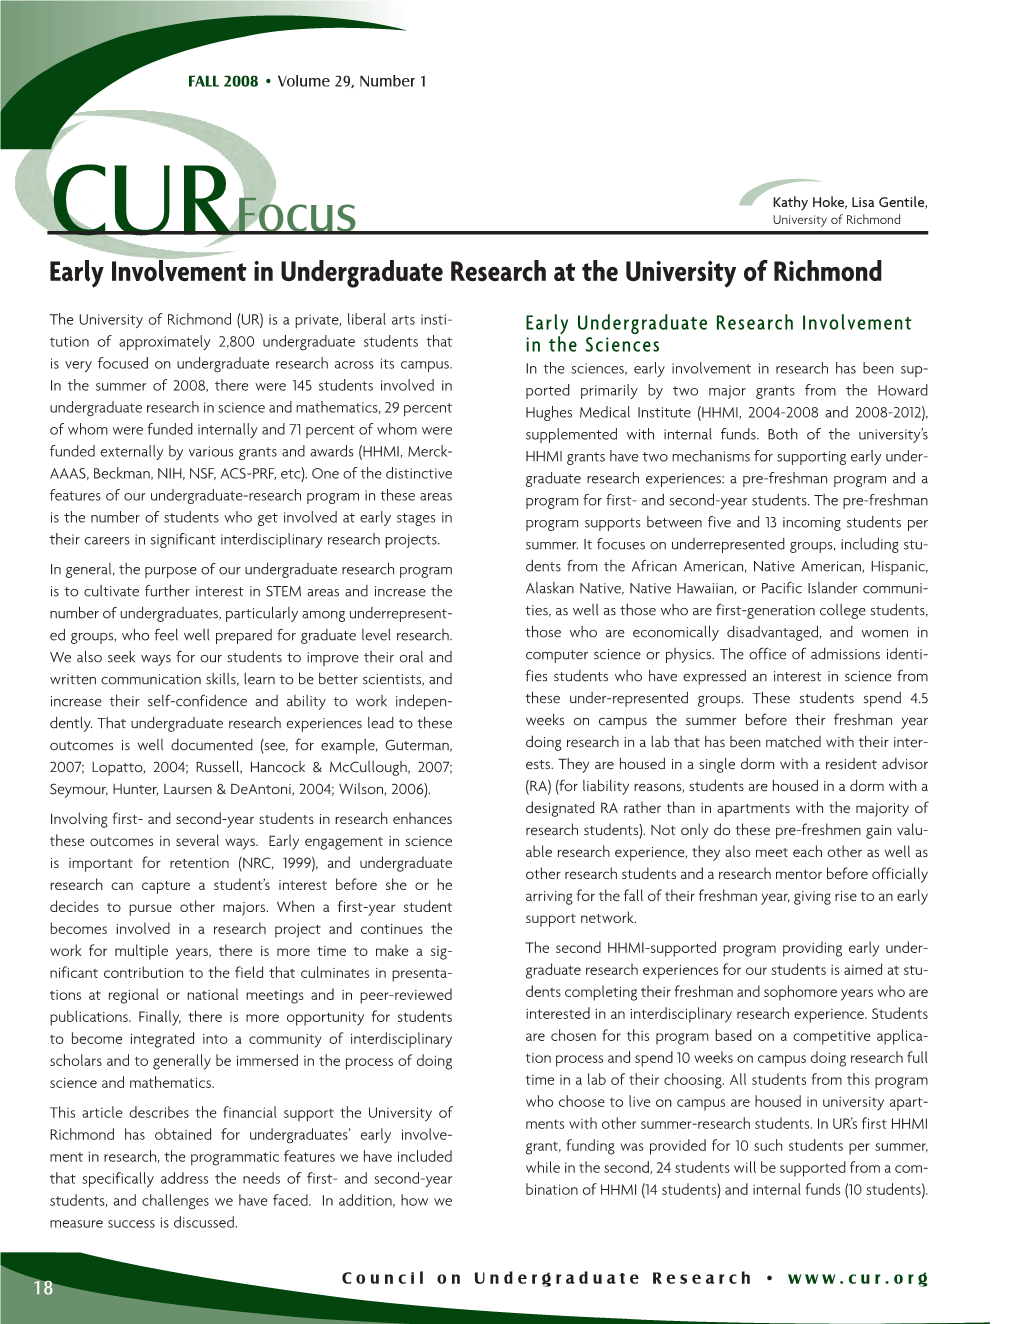 Early Involvement in Undergraduate Research at the University of Richmond